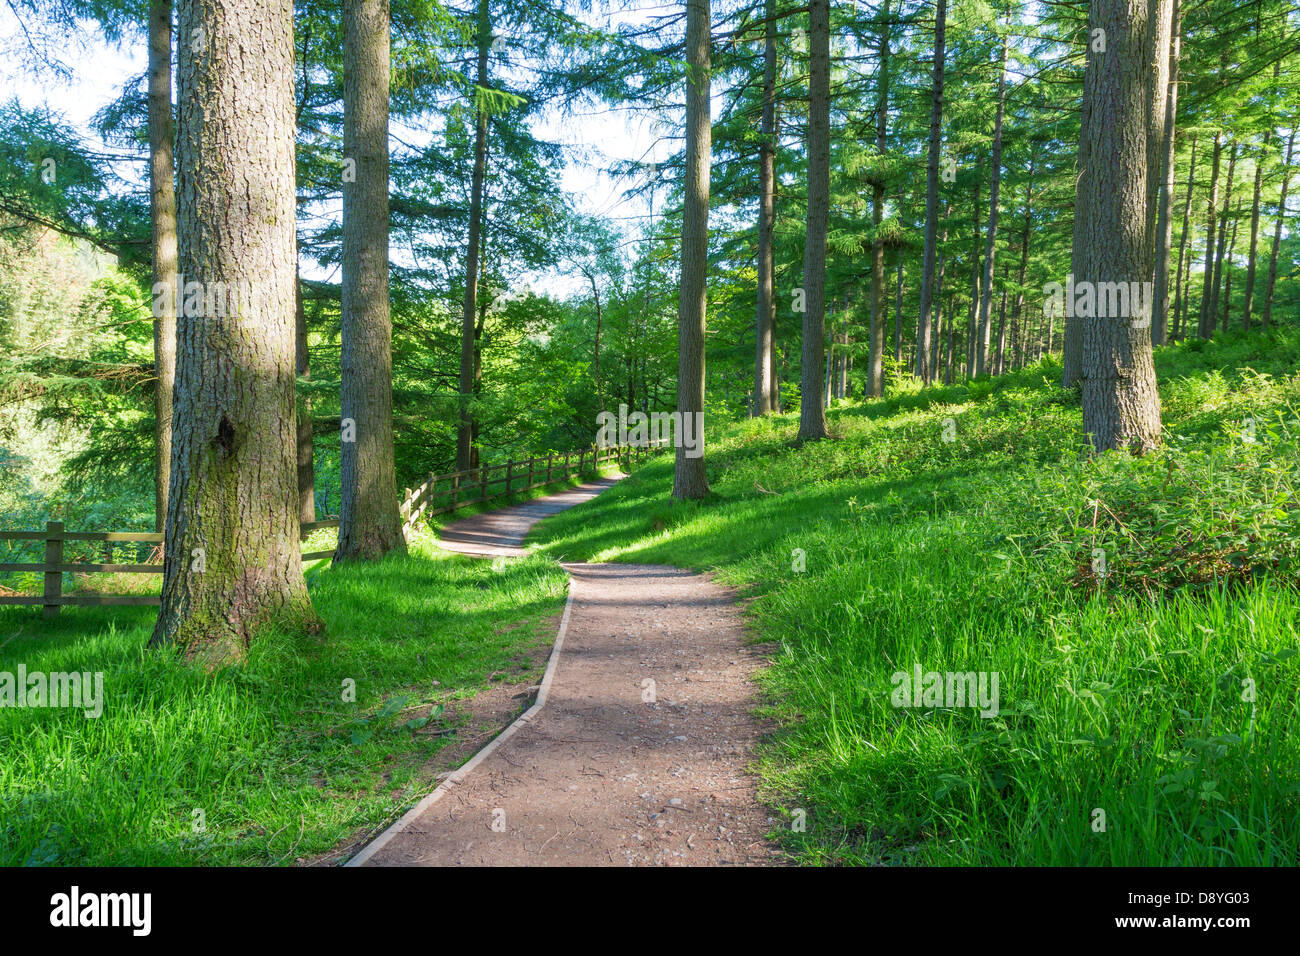 WInding path disappearing into woods. Stock Photo